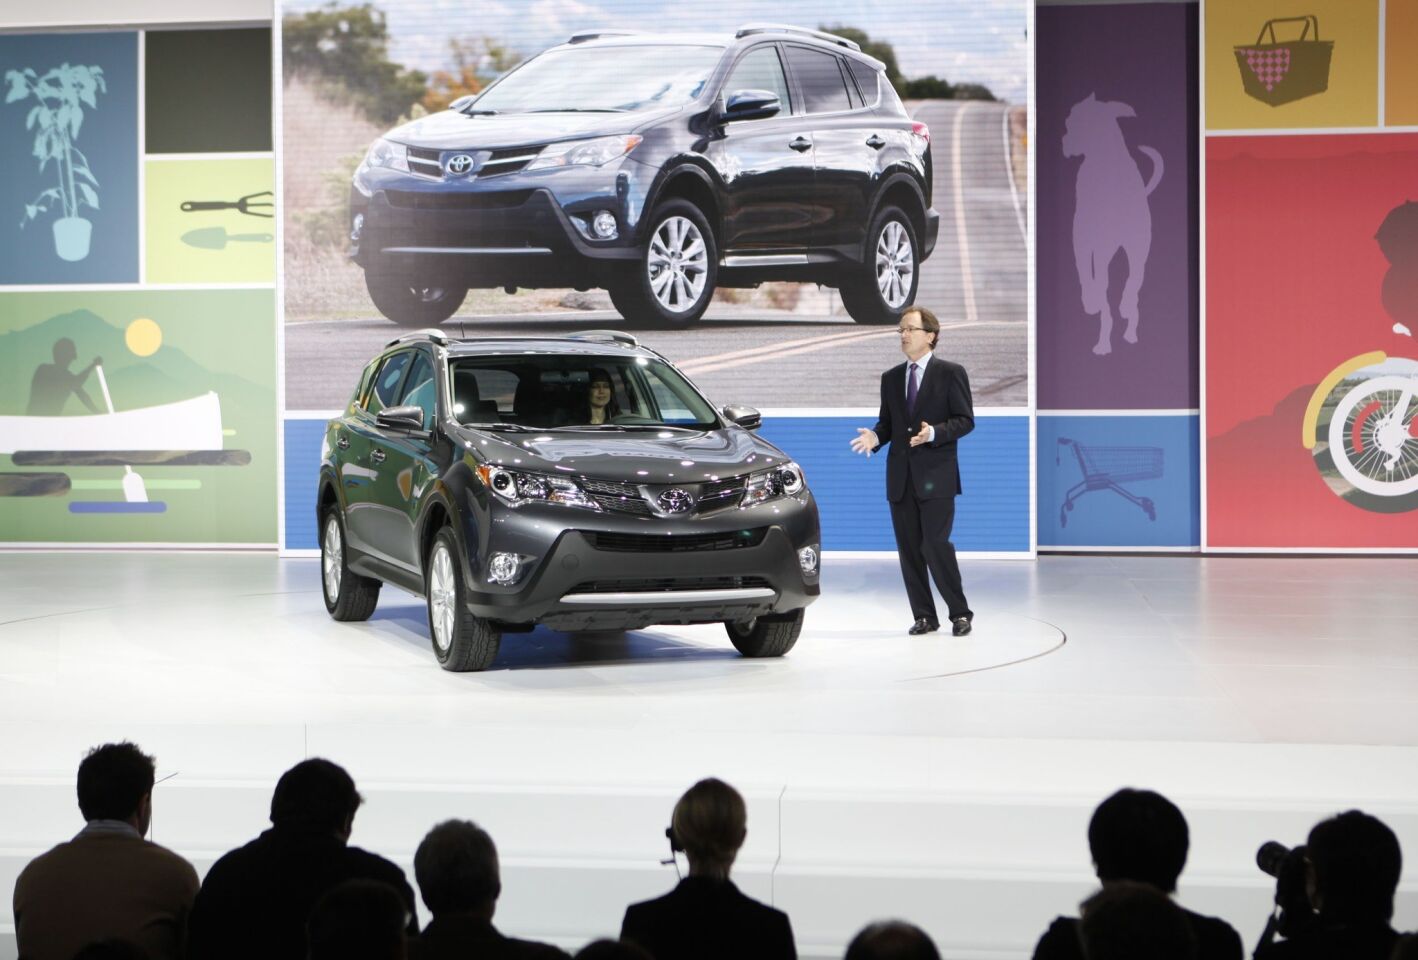 Bill Fay of Toyota Motor Sales kicks off the 2012 Los Angeles Auto Show with the world debut of the all-new 2013 RAV4, the first redesign of the hot-selling small SUV in seven years.